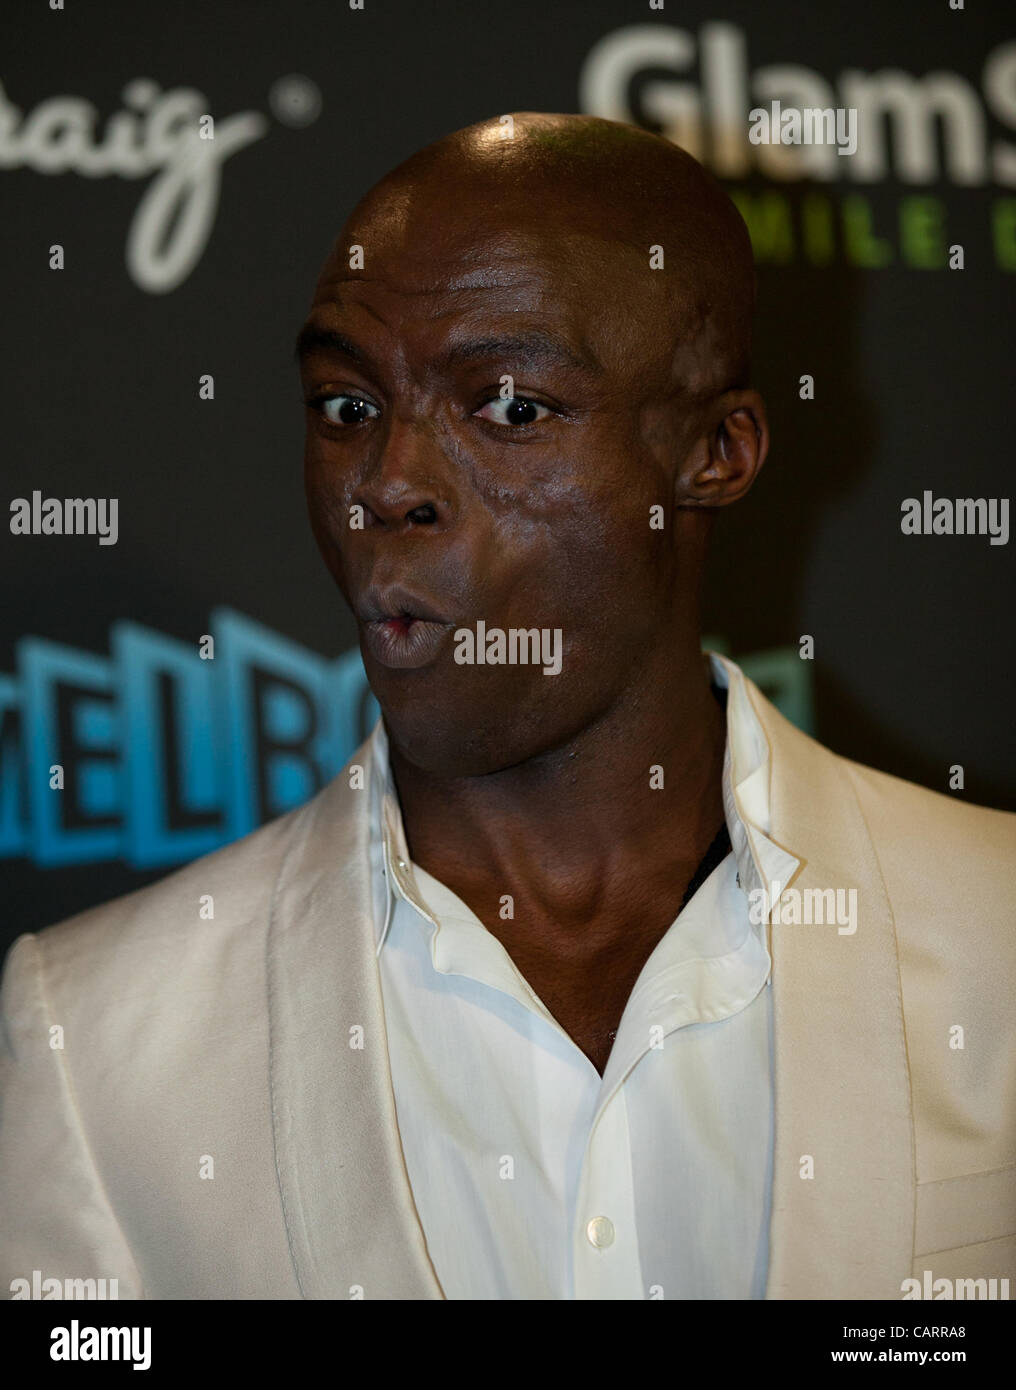 Seal on the red carpet at the Logie Awards, Melbourne April 15, 2012. Stock Photo